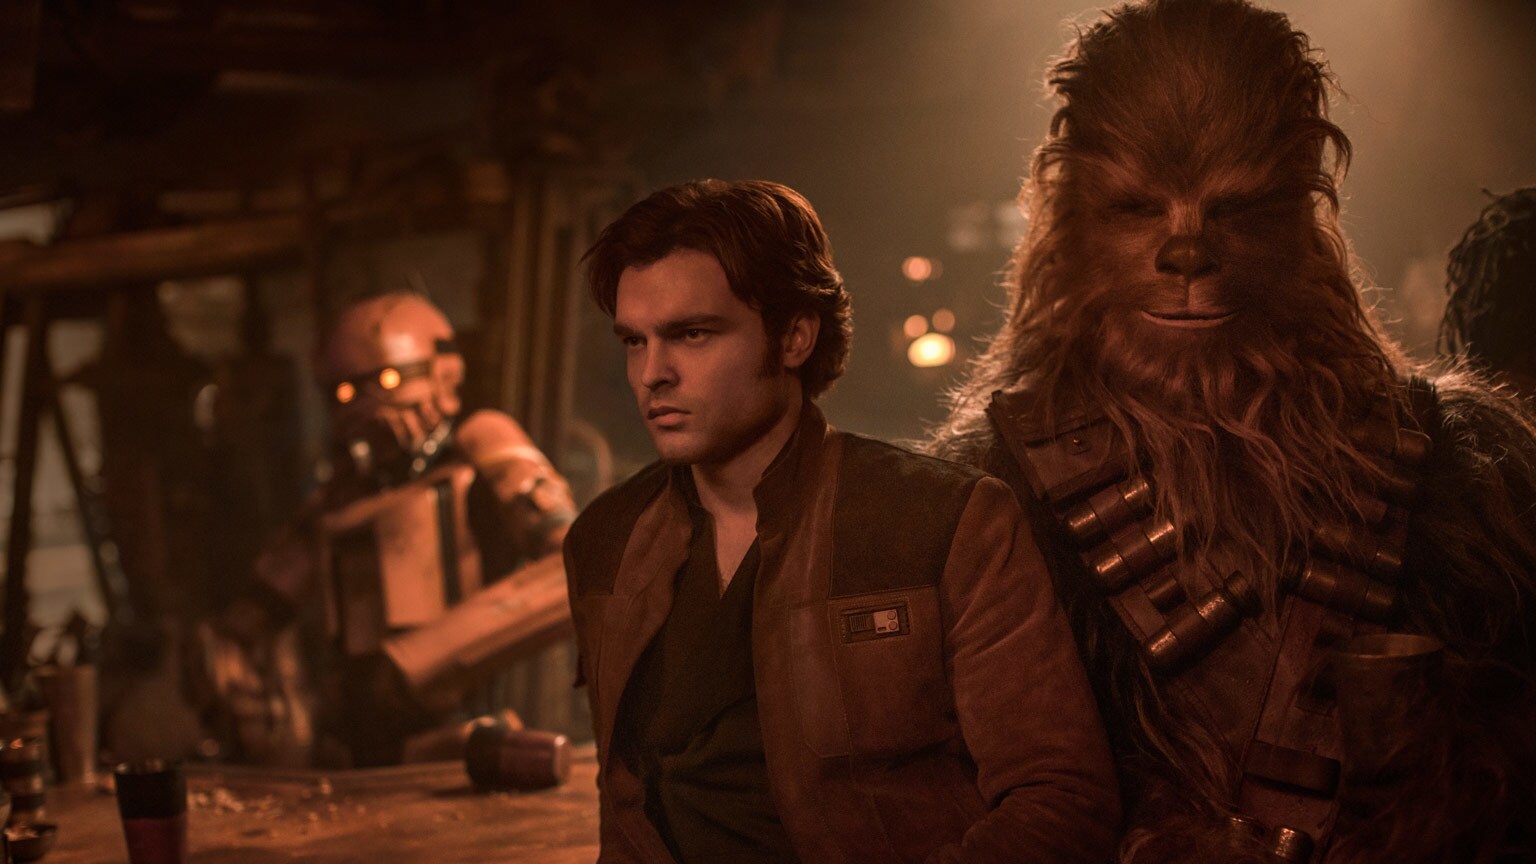 A Portrait of the Scoundrel as a Young Man: Writers Lawrence and Jonathan Kasdan on Solo: A Star Wars Story